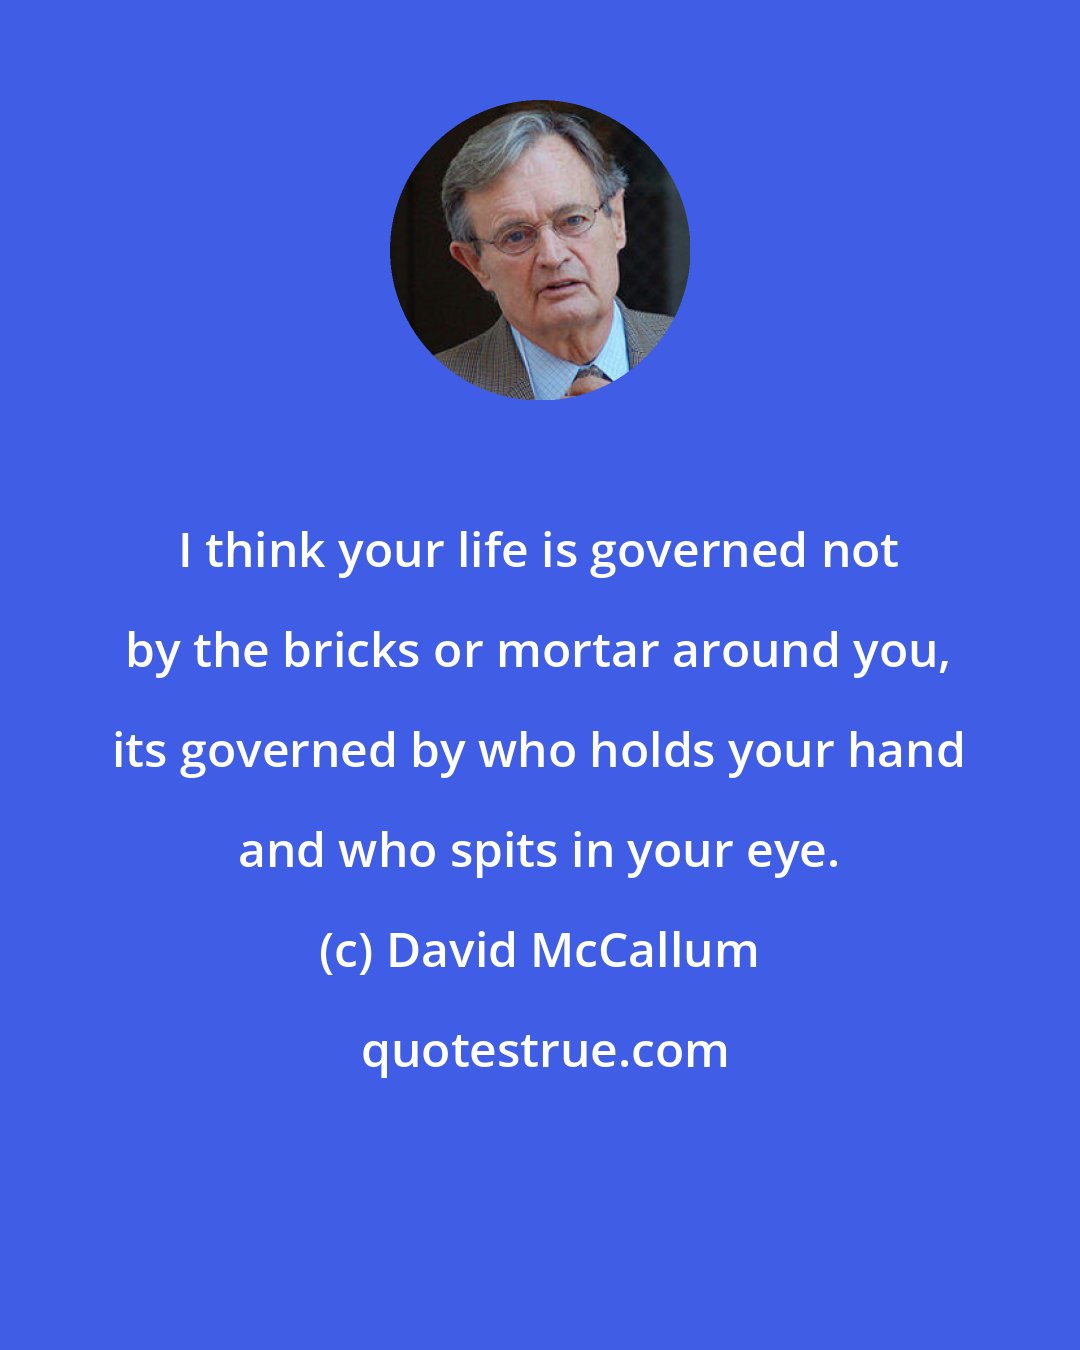 David McCallum: I think your life is governed not by the bricks or mortar around you, its governed by who holds your hand and who spits in your eye.